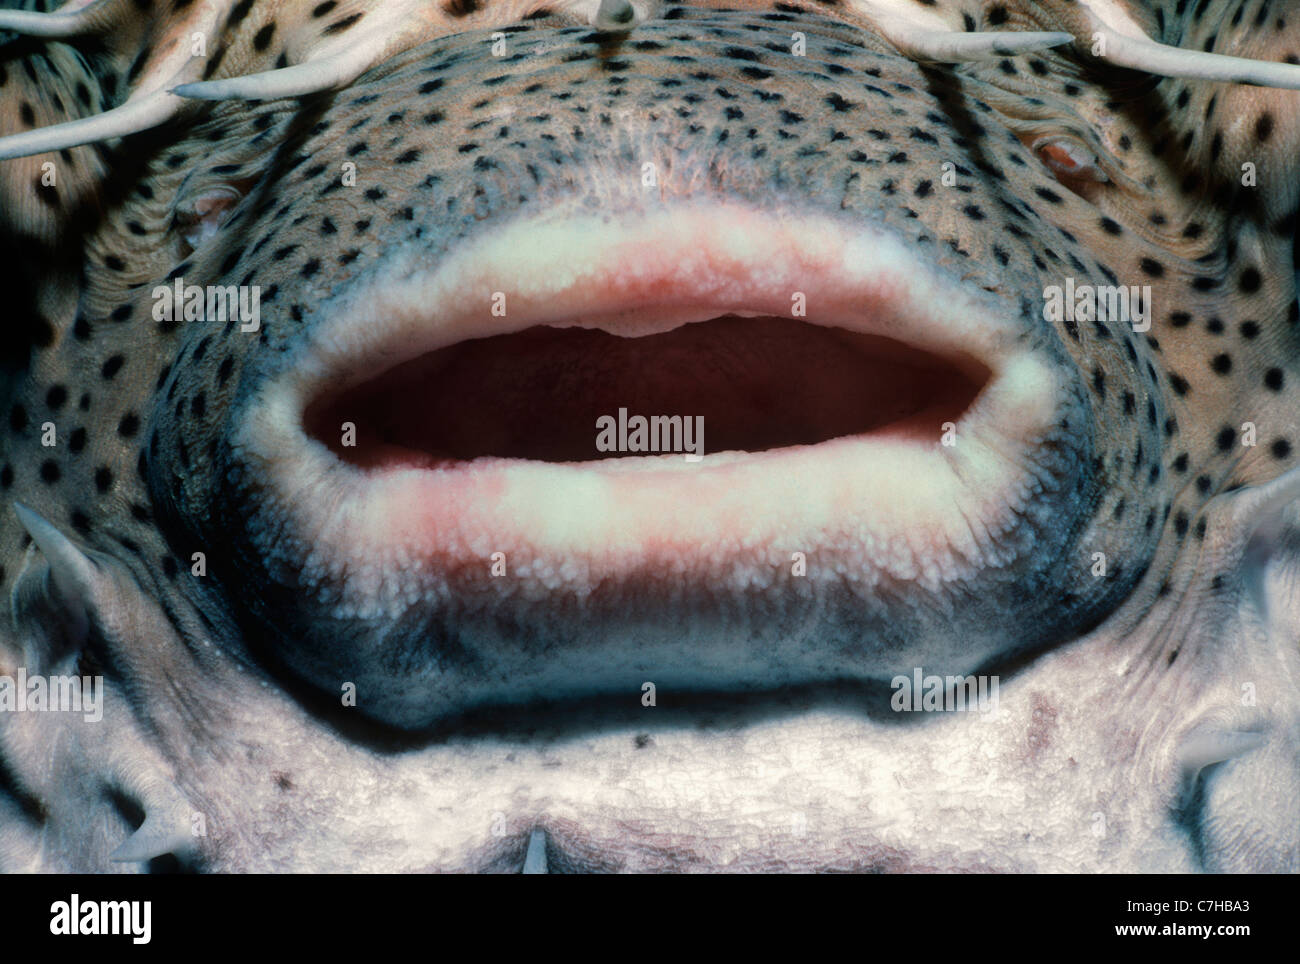 Mouth of a Spotted Porcupinefish (Diodon hystrix) filled with water as a defensive behavior. Bahamas, Caribbean Sea Stock Photo